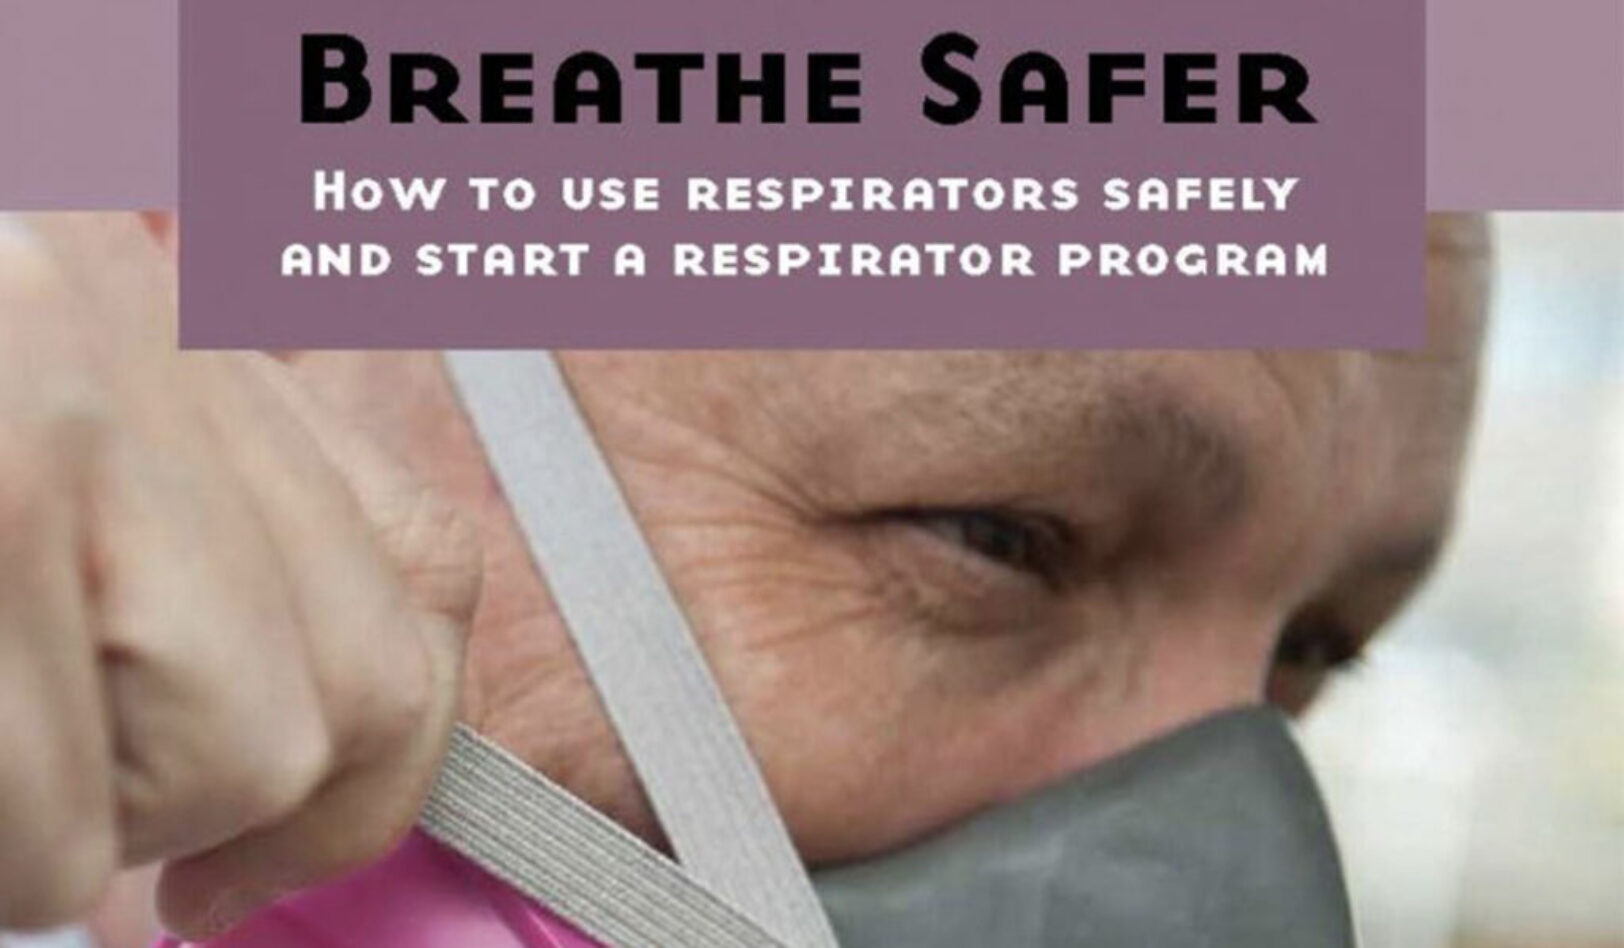 Breathe Safer: How to Use Respirators Safely and Start a Respirator Program